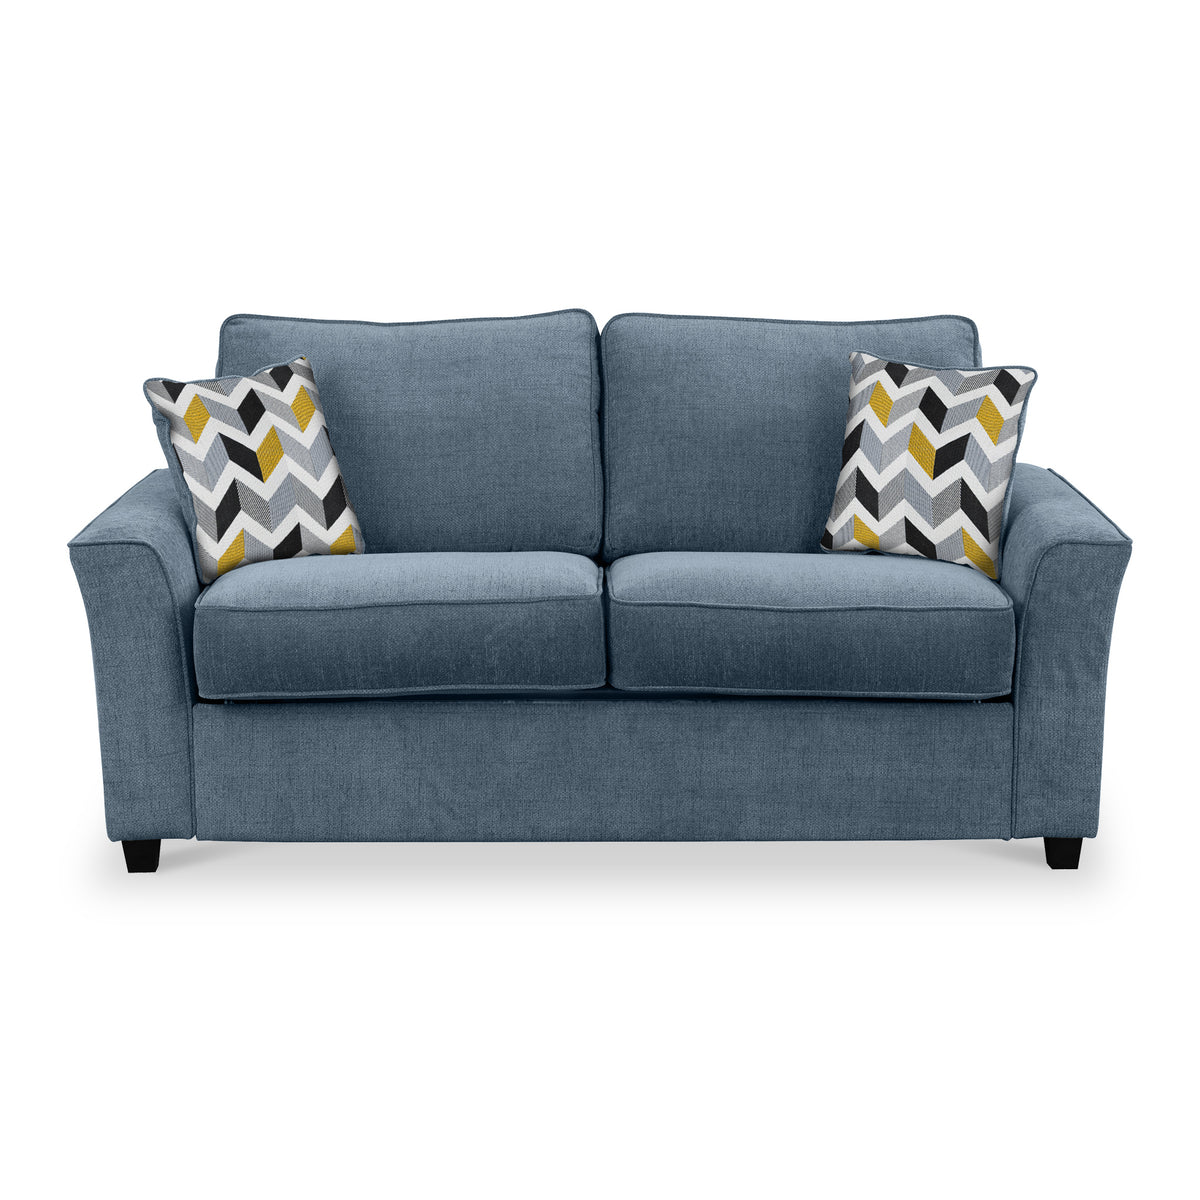 Boston 2 Seater Sofabed in Midnight with Morelisa Mustard Cushions by Roseland Furniture